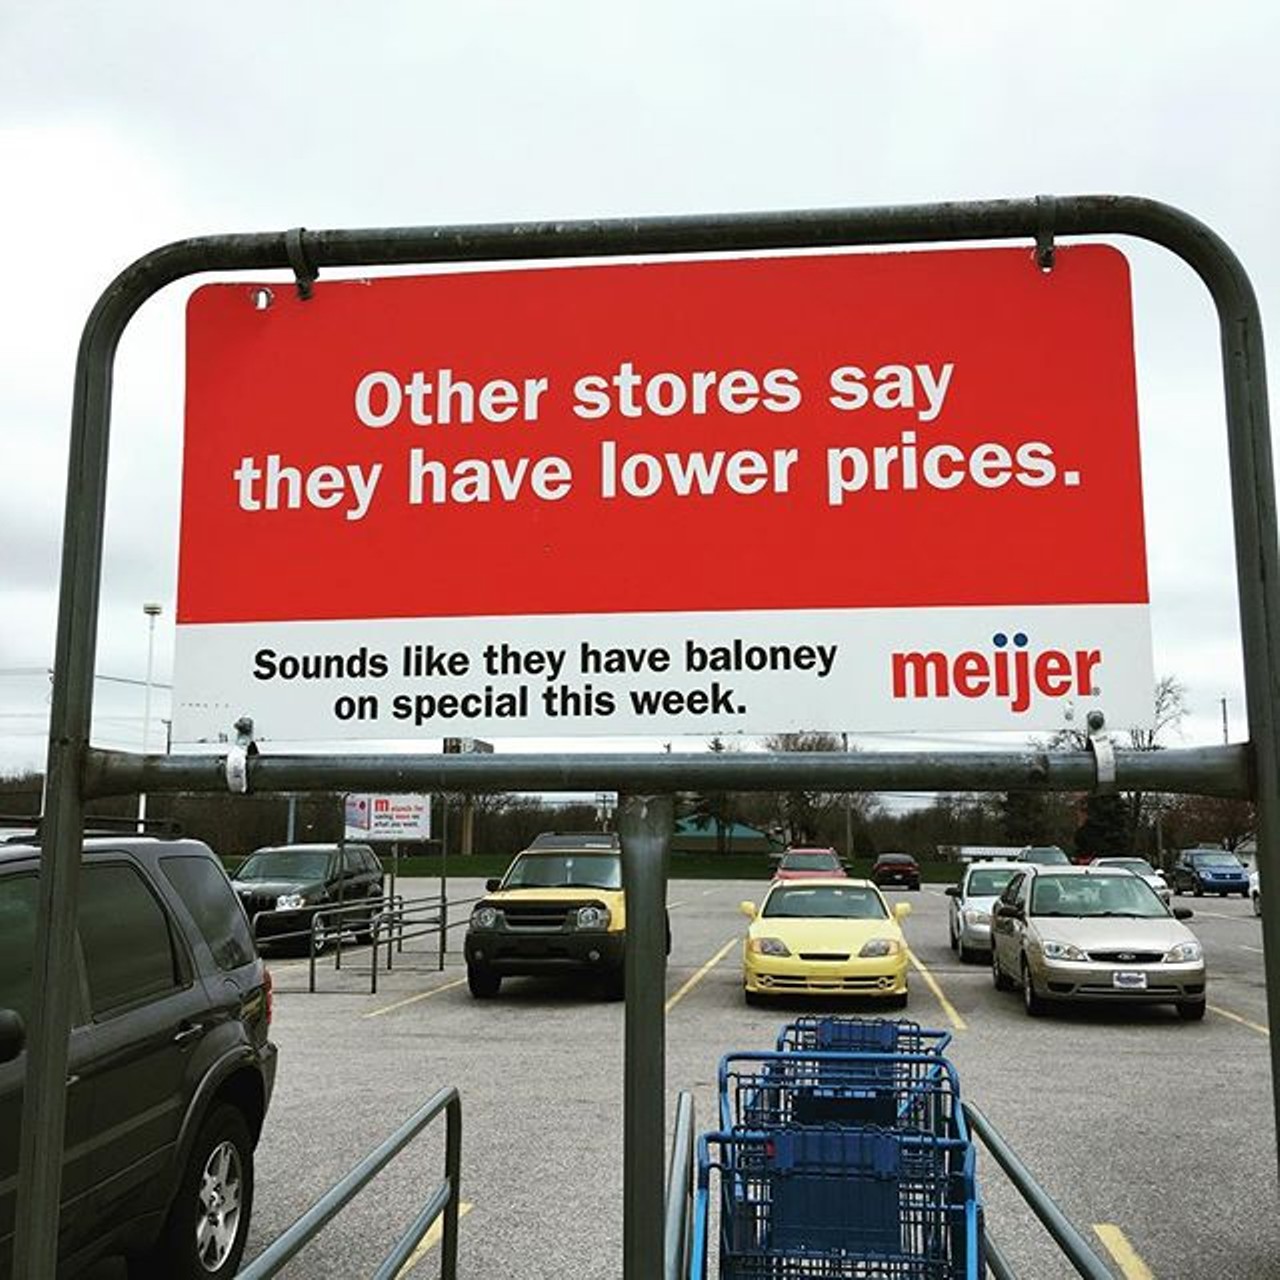 Go to Meijer
If you try hard enough, you can spend an entire day here. Visit the fish for sale, ride bikes, hang out in home and garden. Hey, some even have Starbucks. Day = made. (Photo via Instagram user @bettybling21)